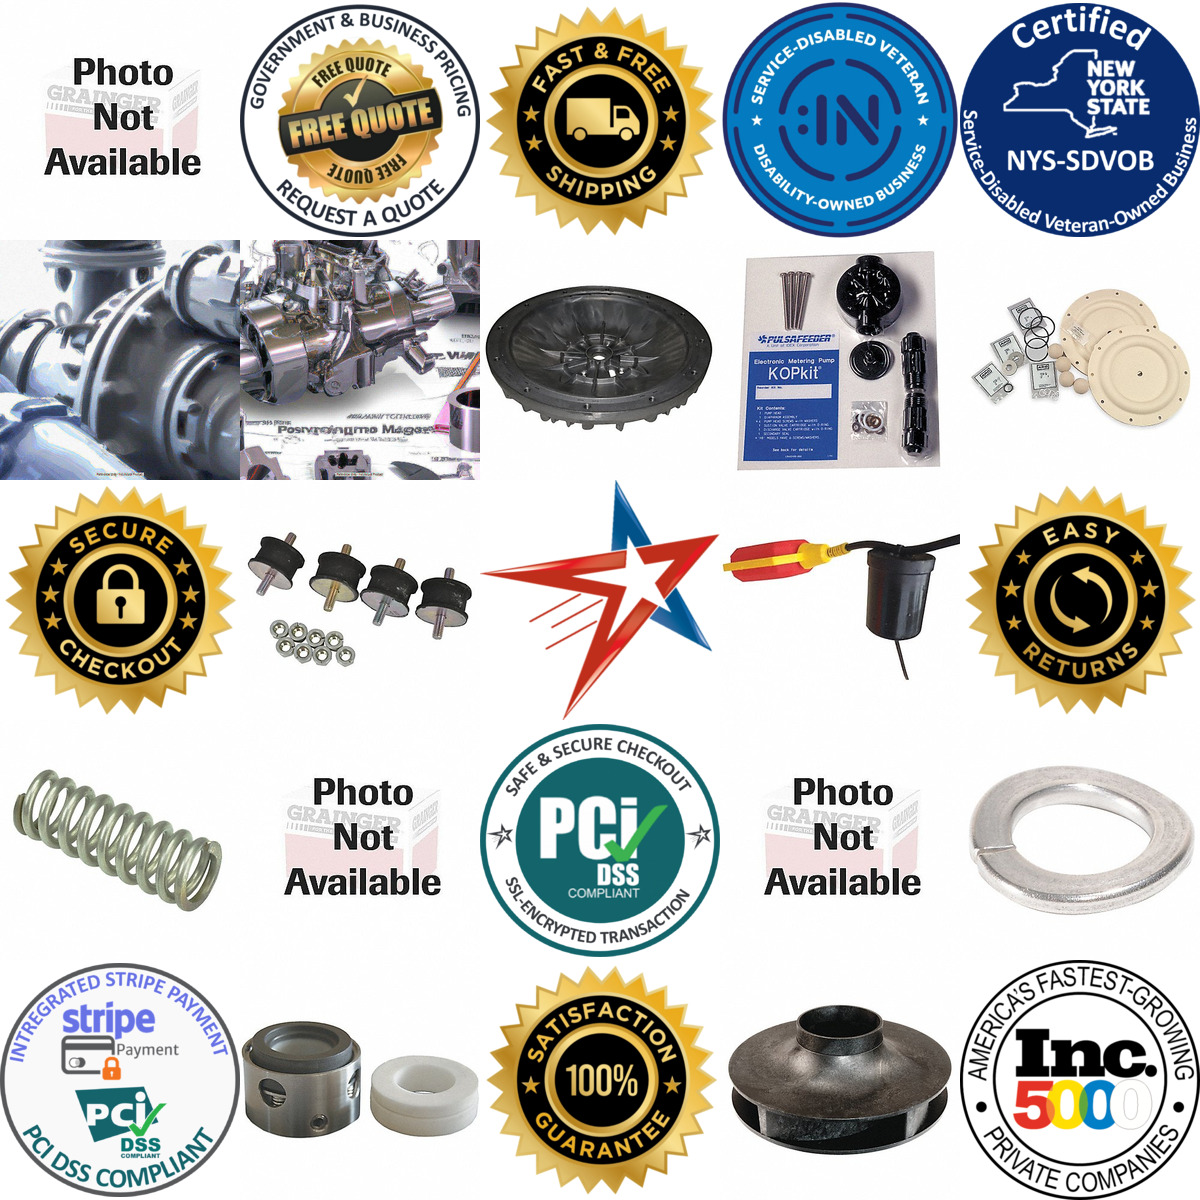 A selection of Parts products on GoVets